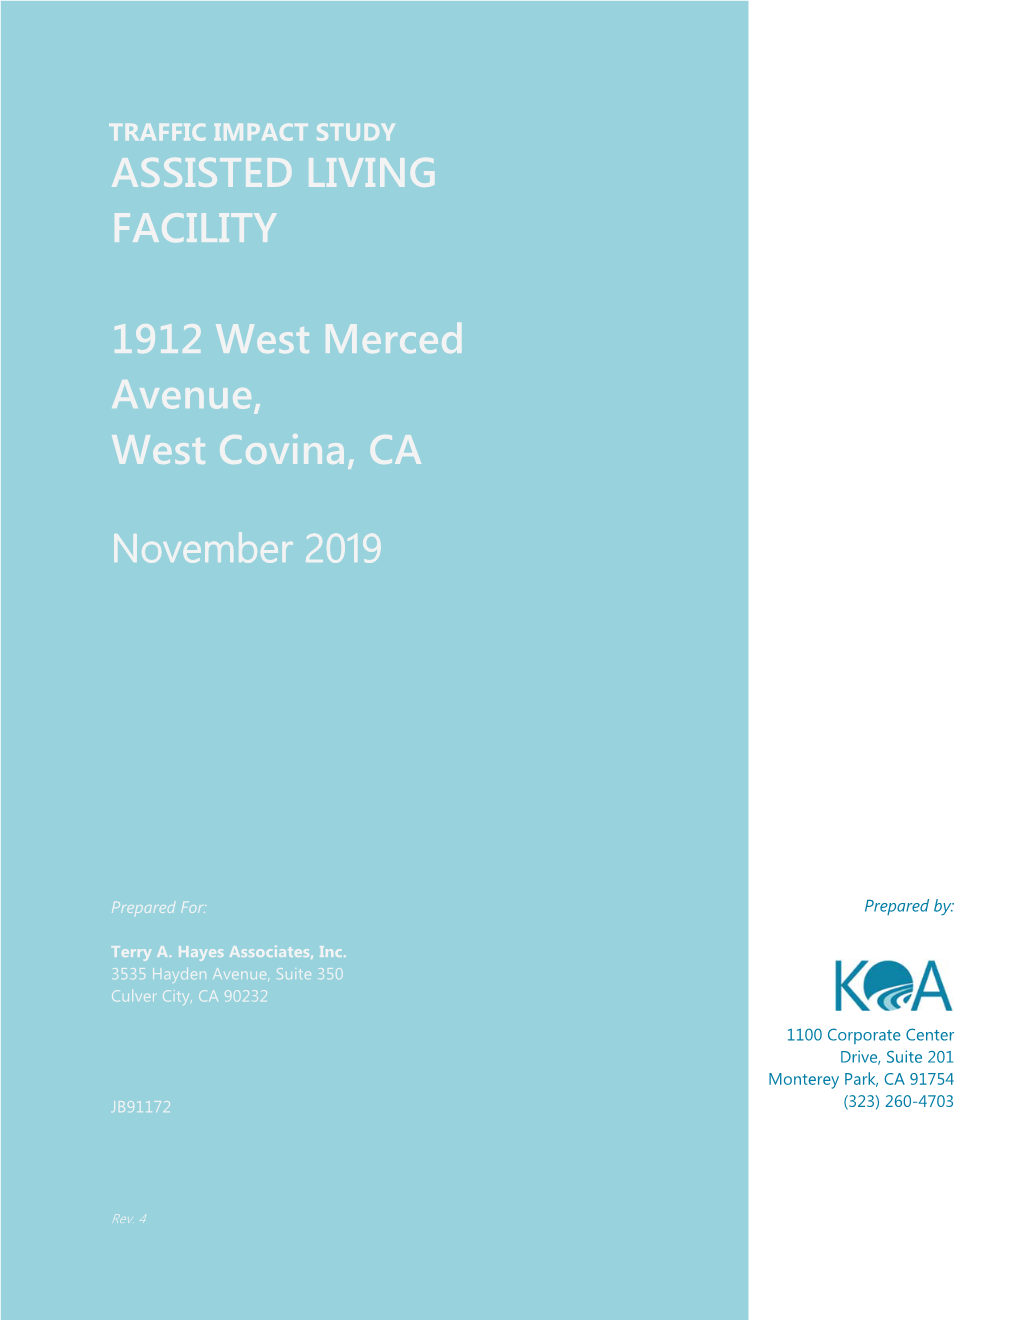 ASSISTED LIVING FACILITY 1912 West Merced